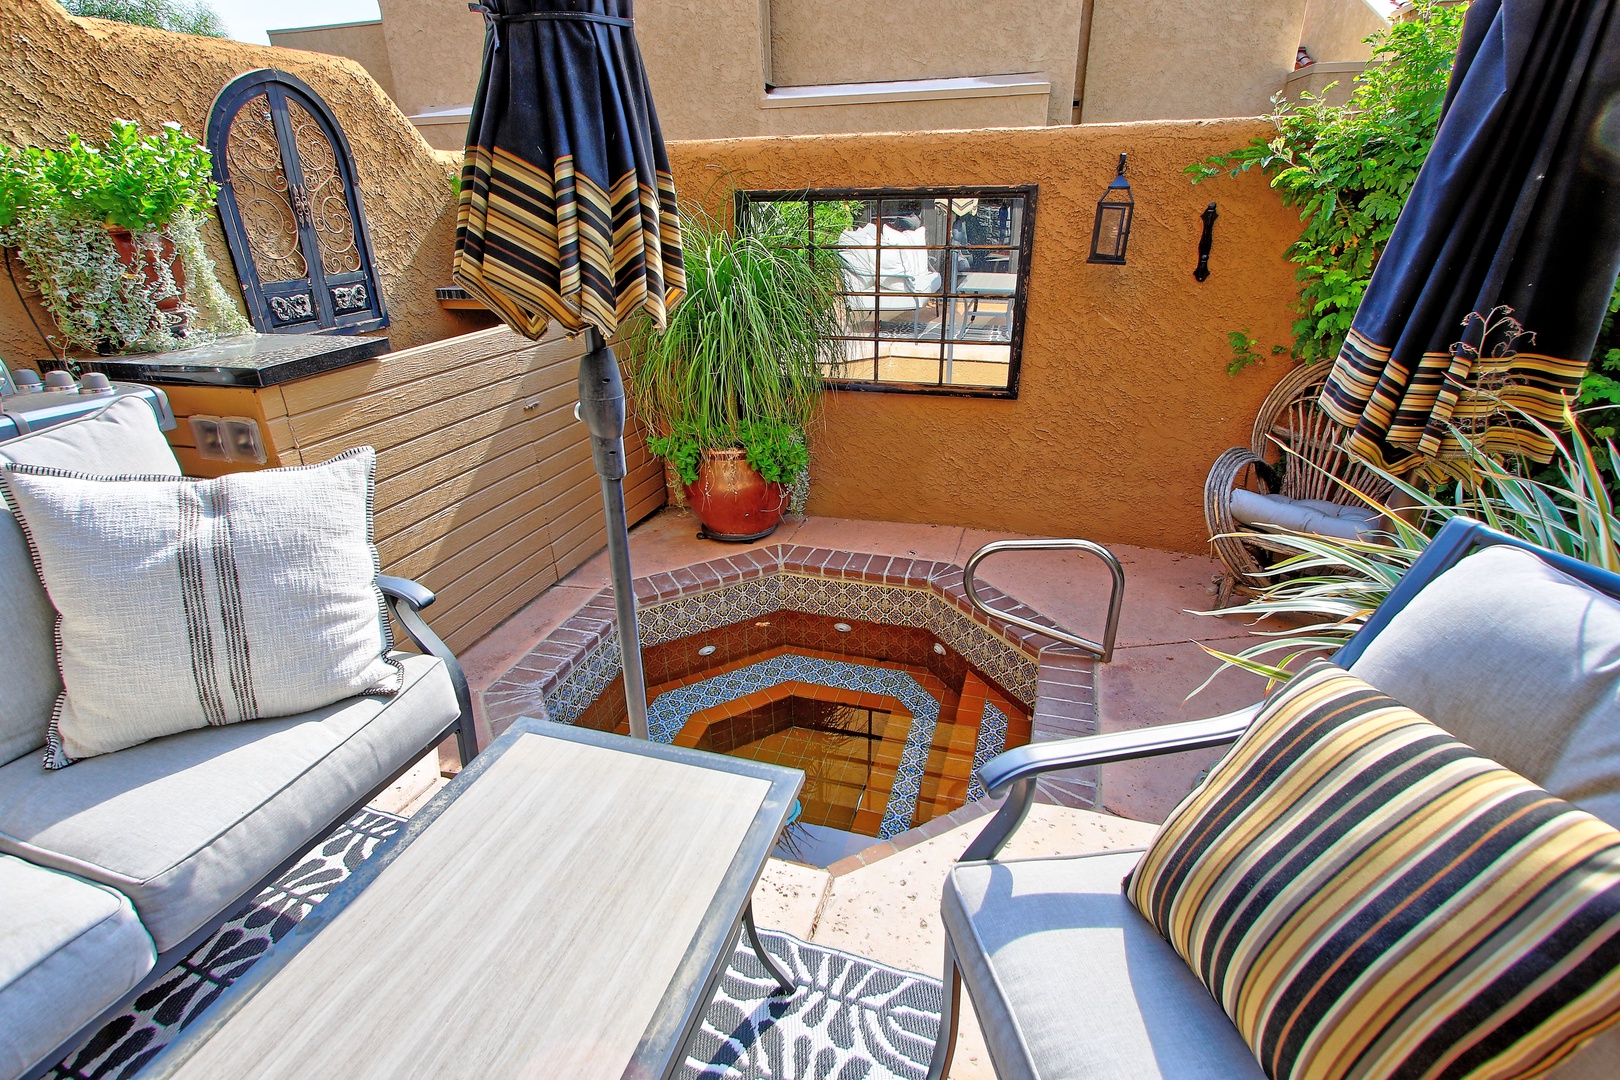 Courtyard has Spa and Seating